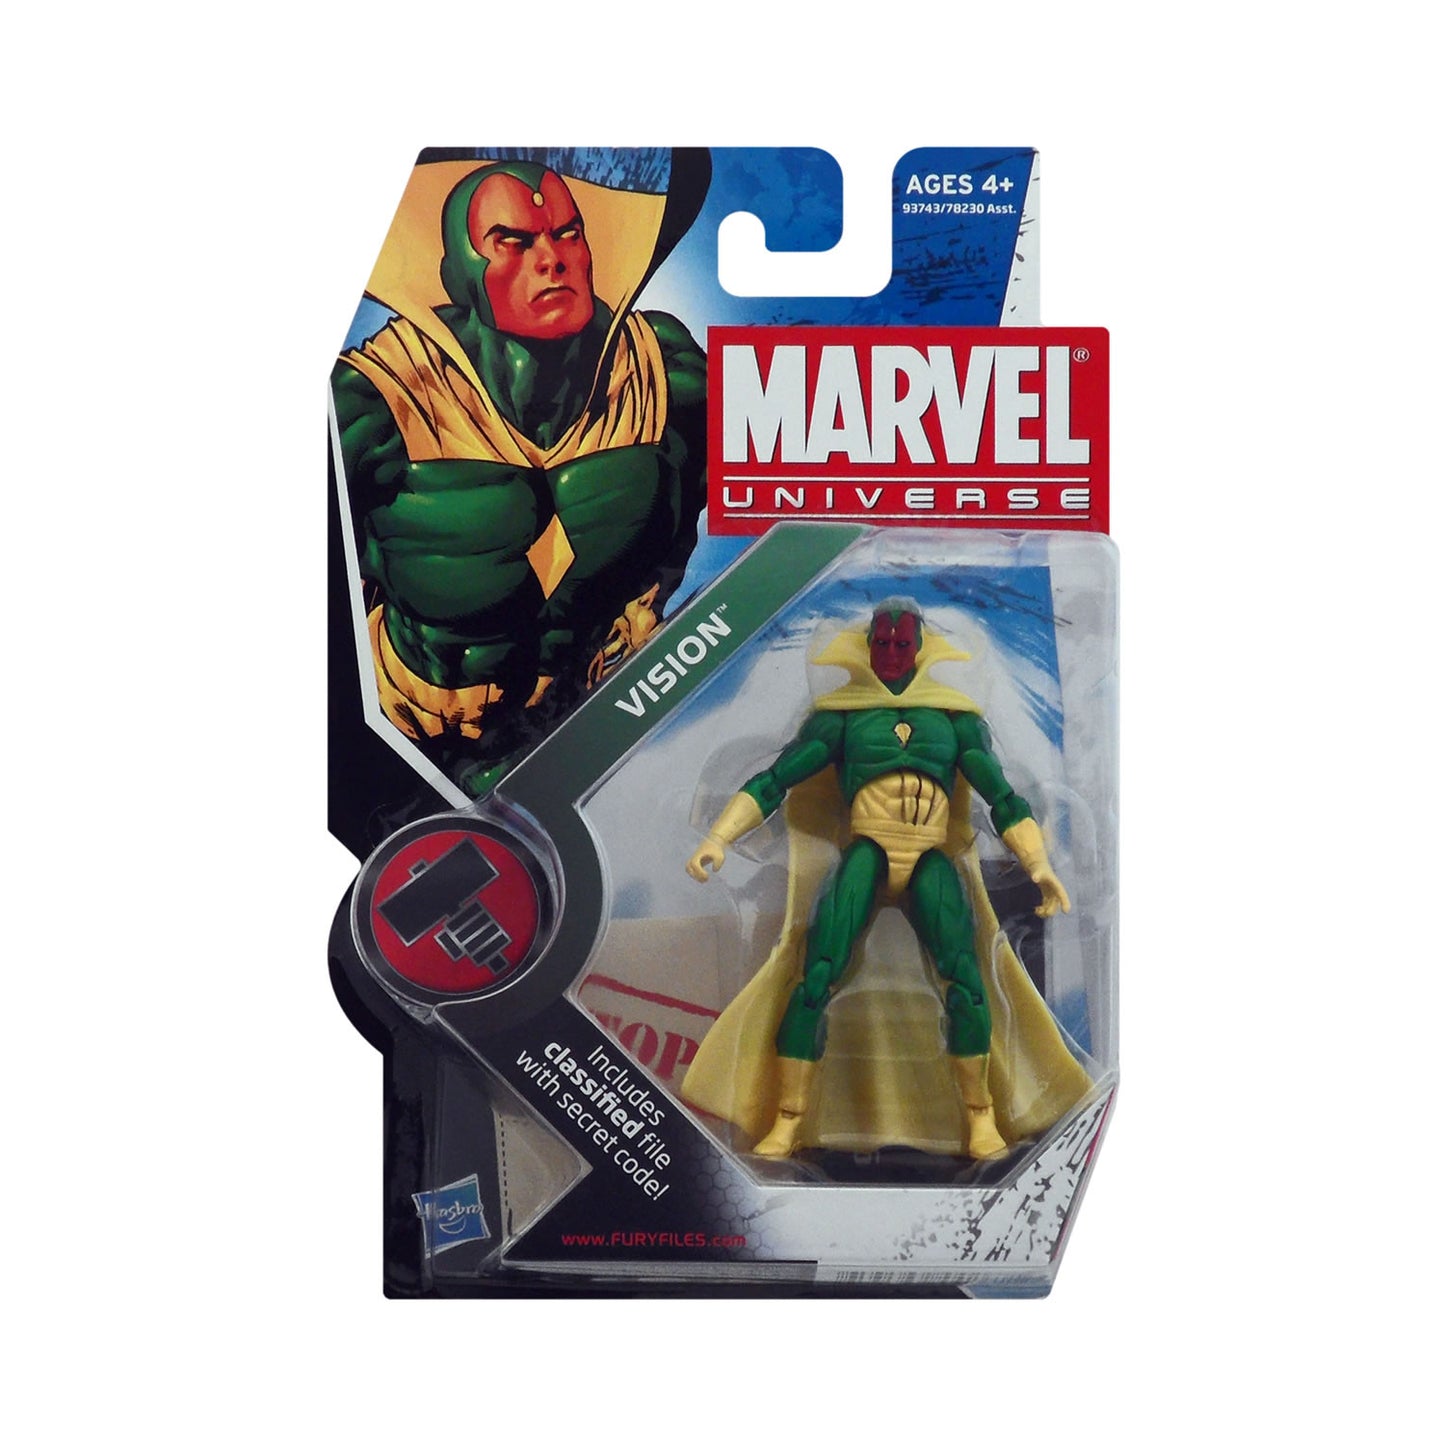 Marvel Universe Series 2 Figure 6 Vision (Solid) 3.75-Inch Action Figure